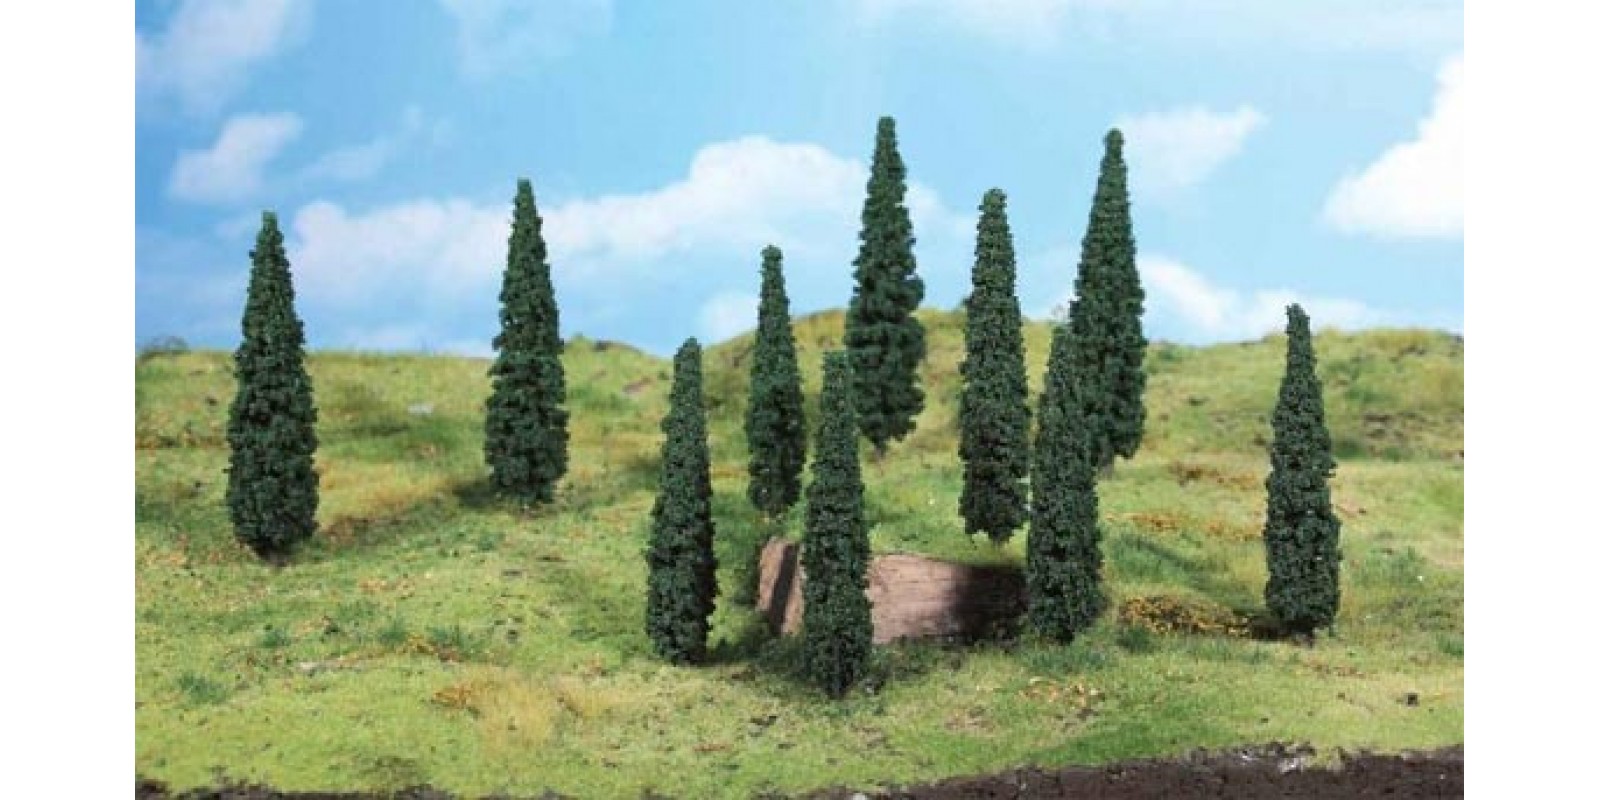 HE1190 8 Cypresses for mediterranean style on your layout 8-10 cm., HO